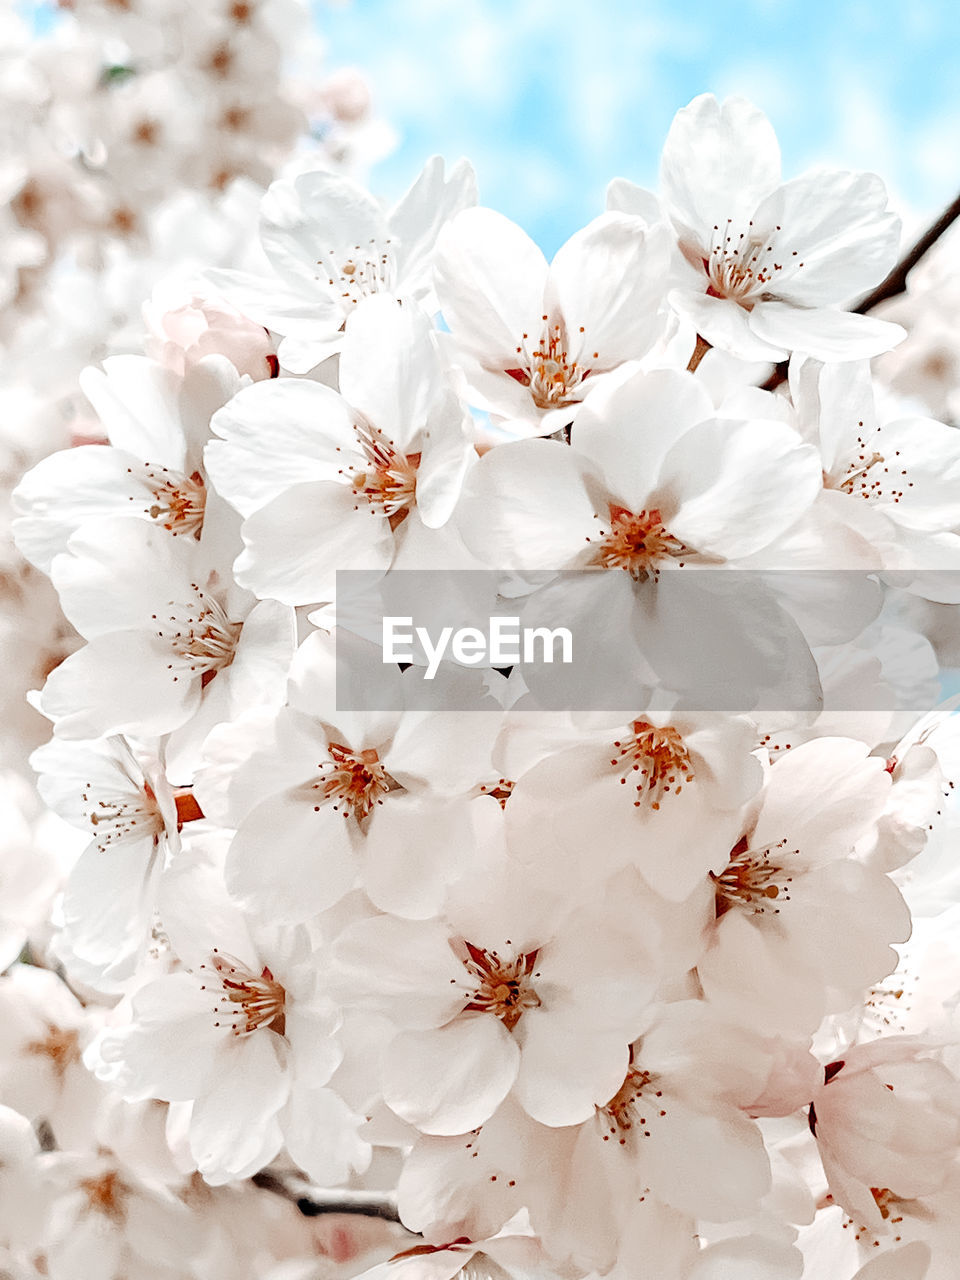 plant, flower, flowering plant, petal, branch, white, beauty in nature, freshness, nature, blossom, springtime, fragility, no people, cherry blossom, close-up, celebration, tree, backgrounds, event, outdoors, inflorescence, flower head, sky, holiday, spring, macro photography, day, focus on foreground, growth